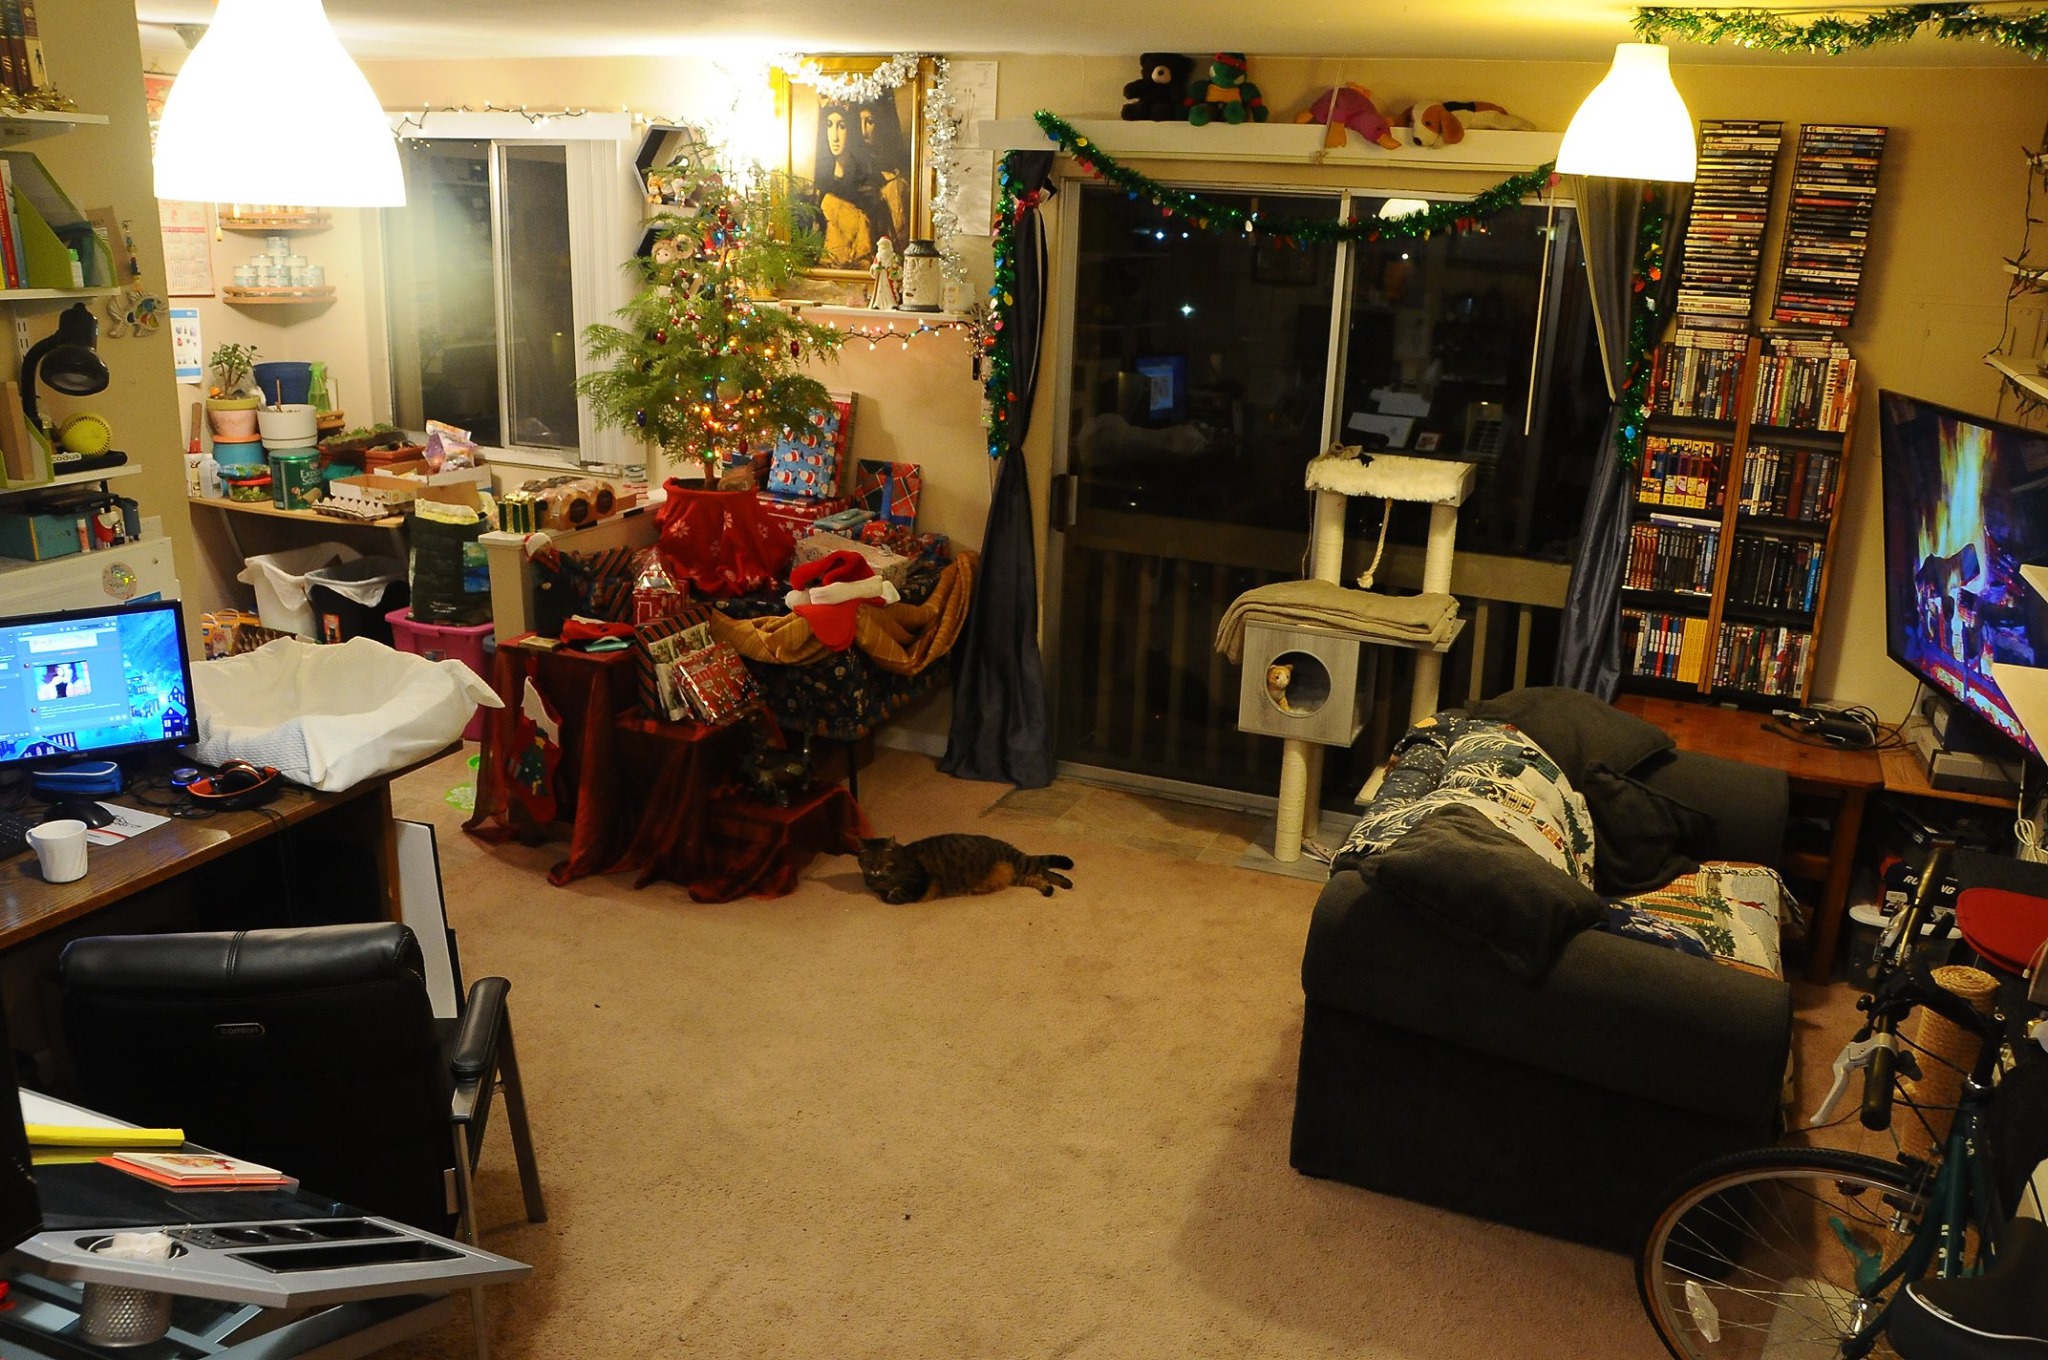 Living room in 2019, at a much wider angle than before! (I was working as a photographer, and had enough seniority at this point that nobody questioned it when I decided to keep my gear over the Christmas break.) Morrie's easel has been replaced by an angled art desk, and our cat Ritzville lounges in center frame.